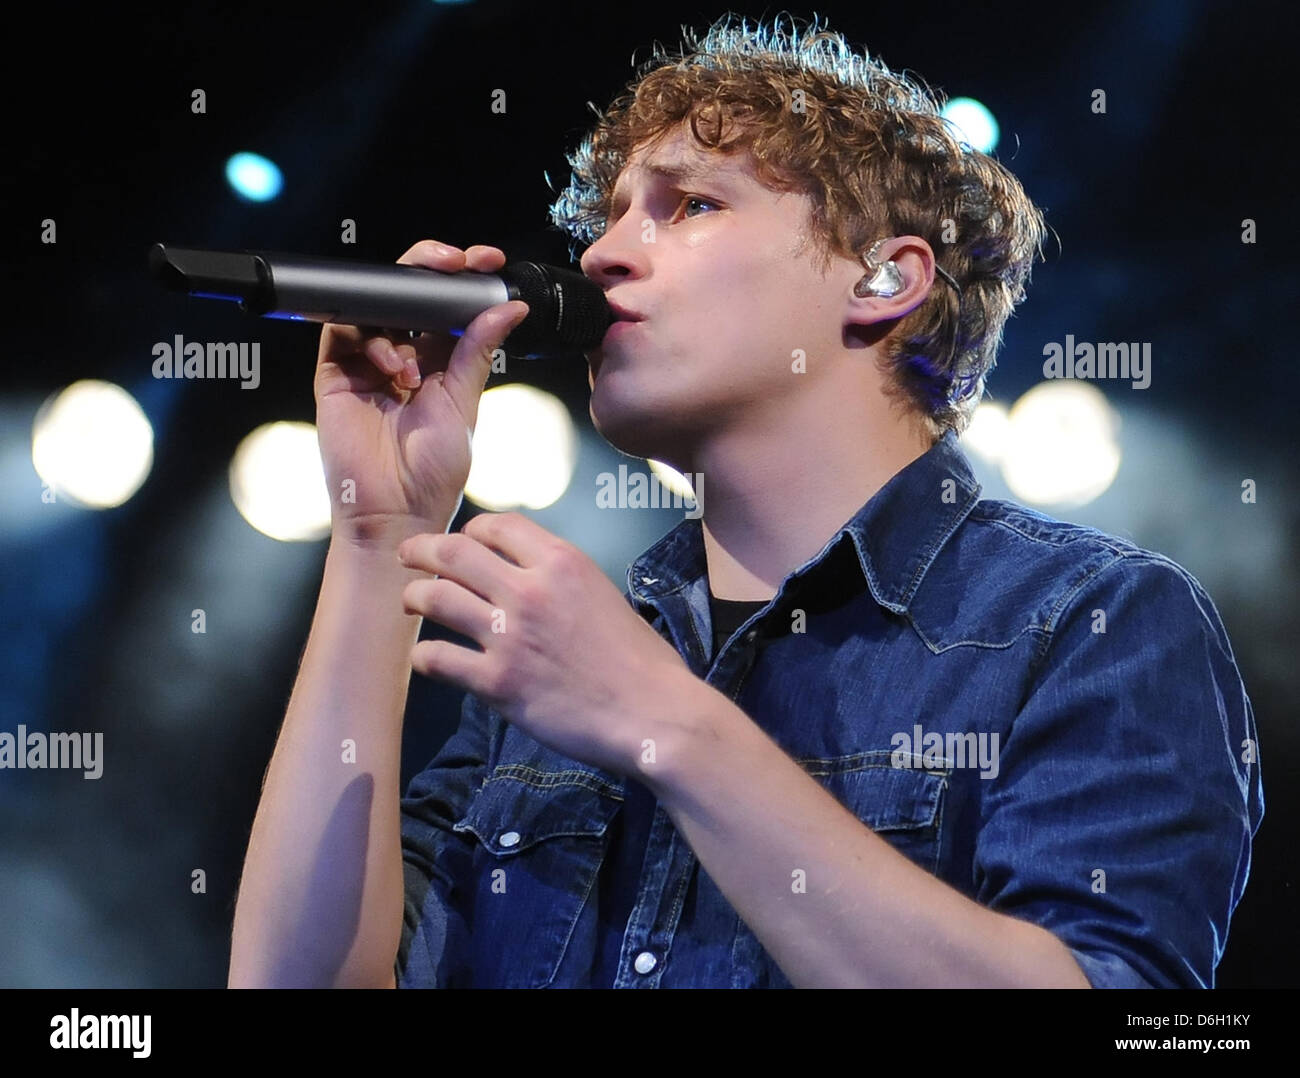 German singer Tim Bendzko performs on stage during his 'Du warst noch nie  hier' tour at the Columbia hall in Berlin, Germany, 27 February 2012.  Photo: Britta Pedersen Stock Photo - Alamy